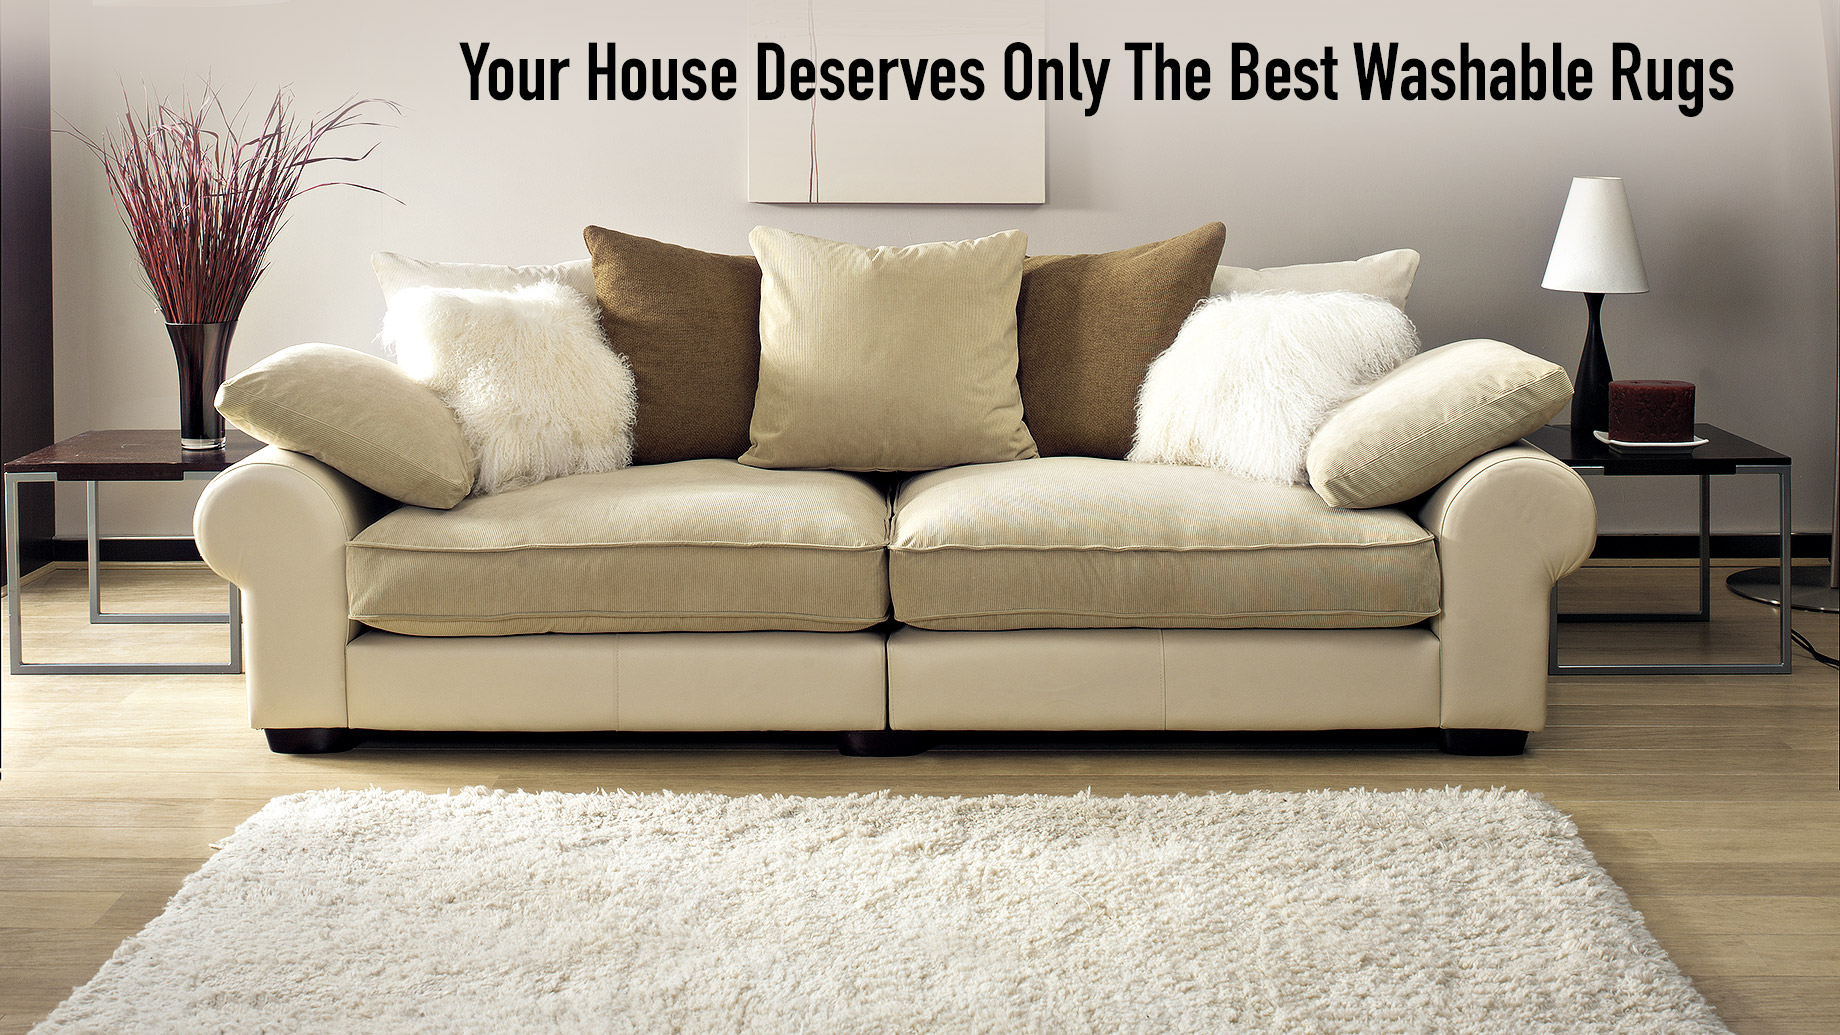 Your House Deserves Only The Best Washable Rugs